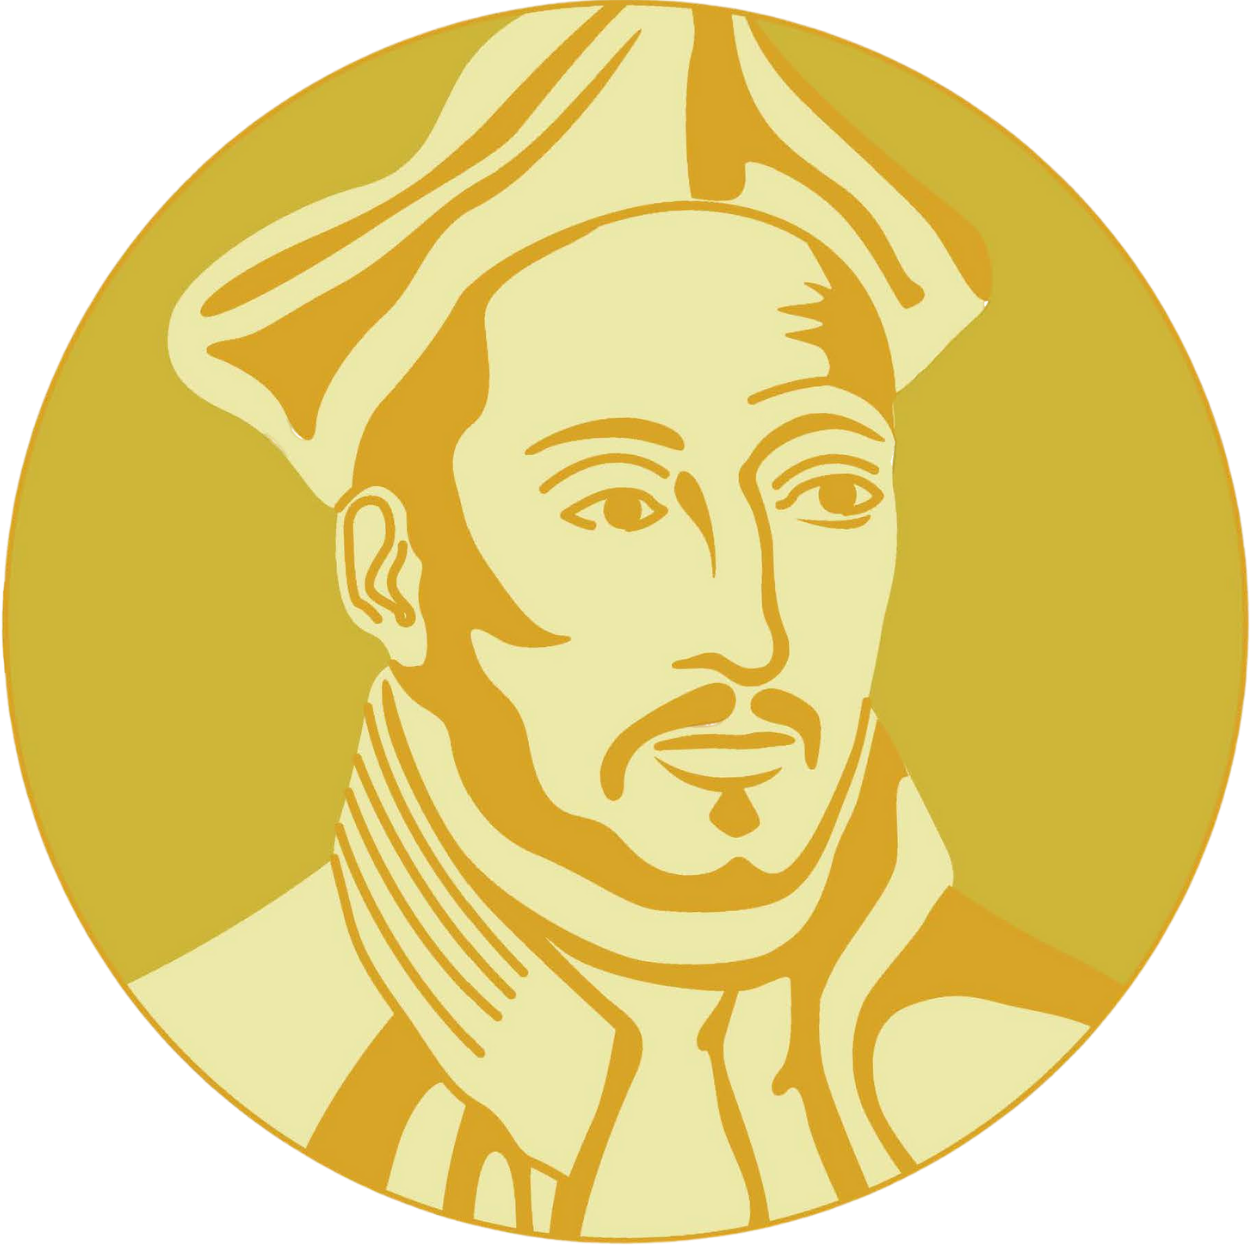 An image drawing of St. Ignatius of Loyola